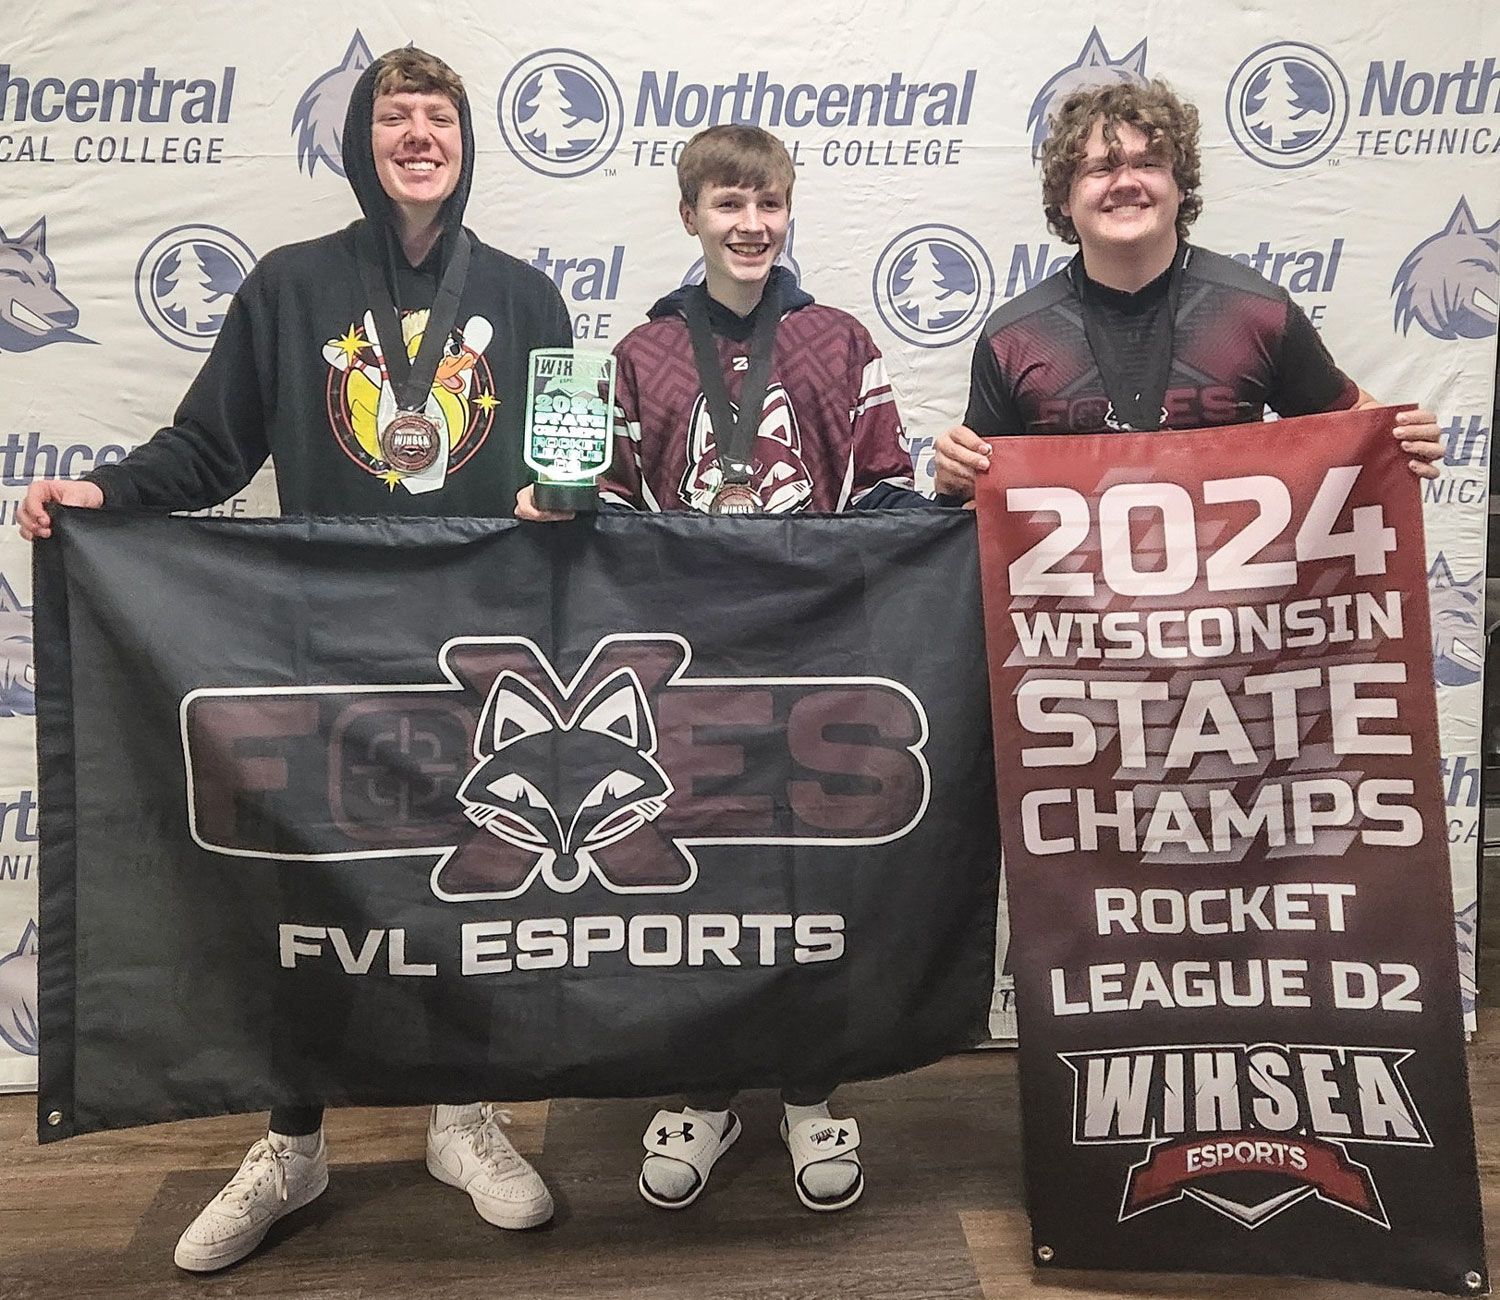 Winning team members holding banners - one is for FVL Esports and the other is for the 2024 State Champs.